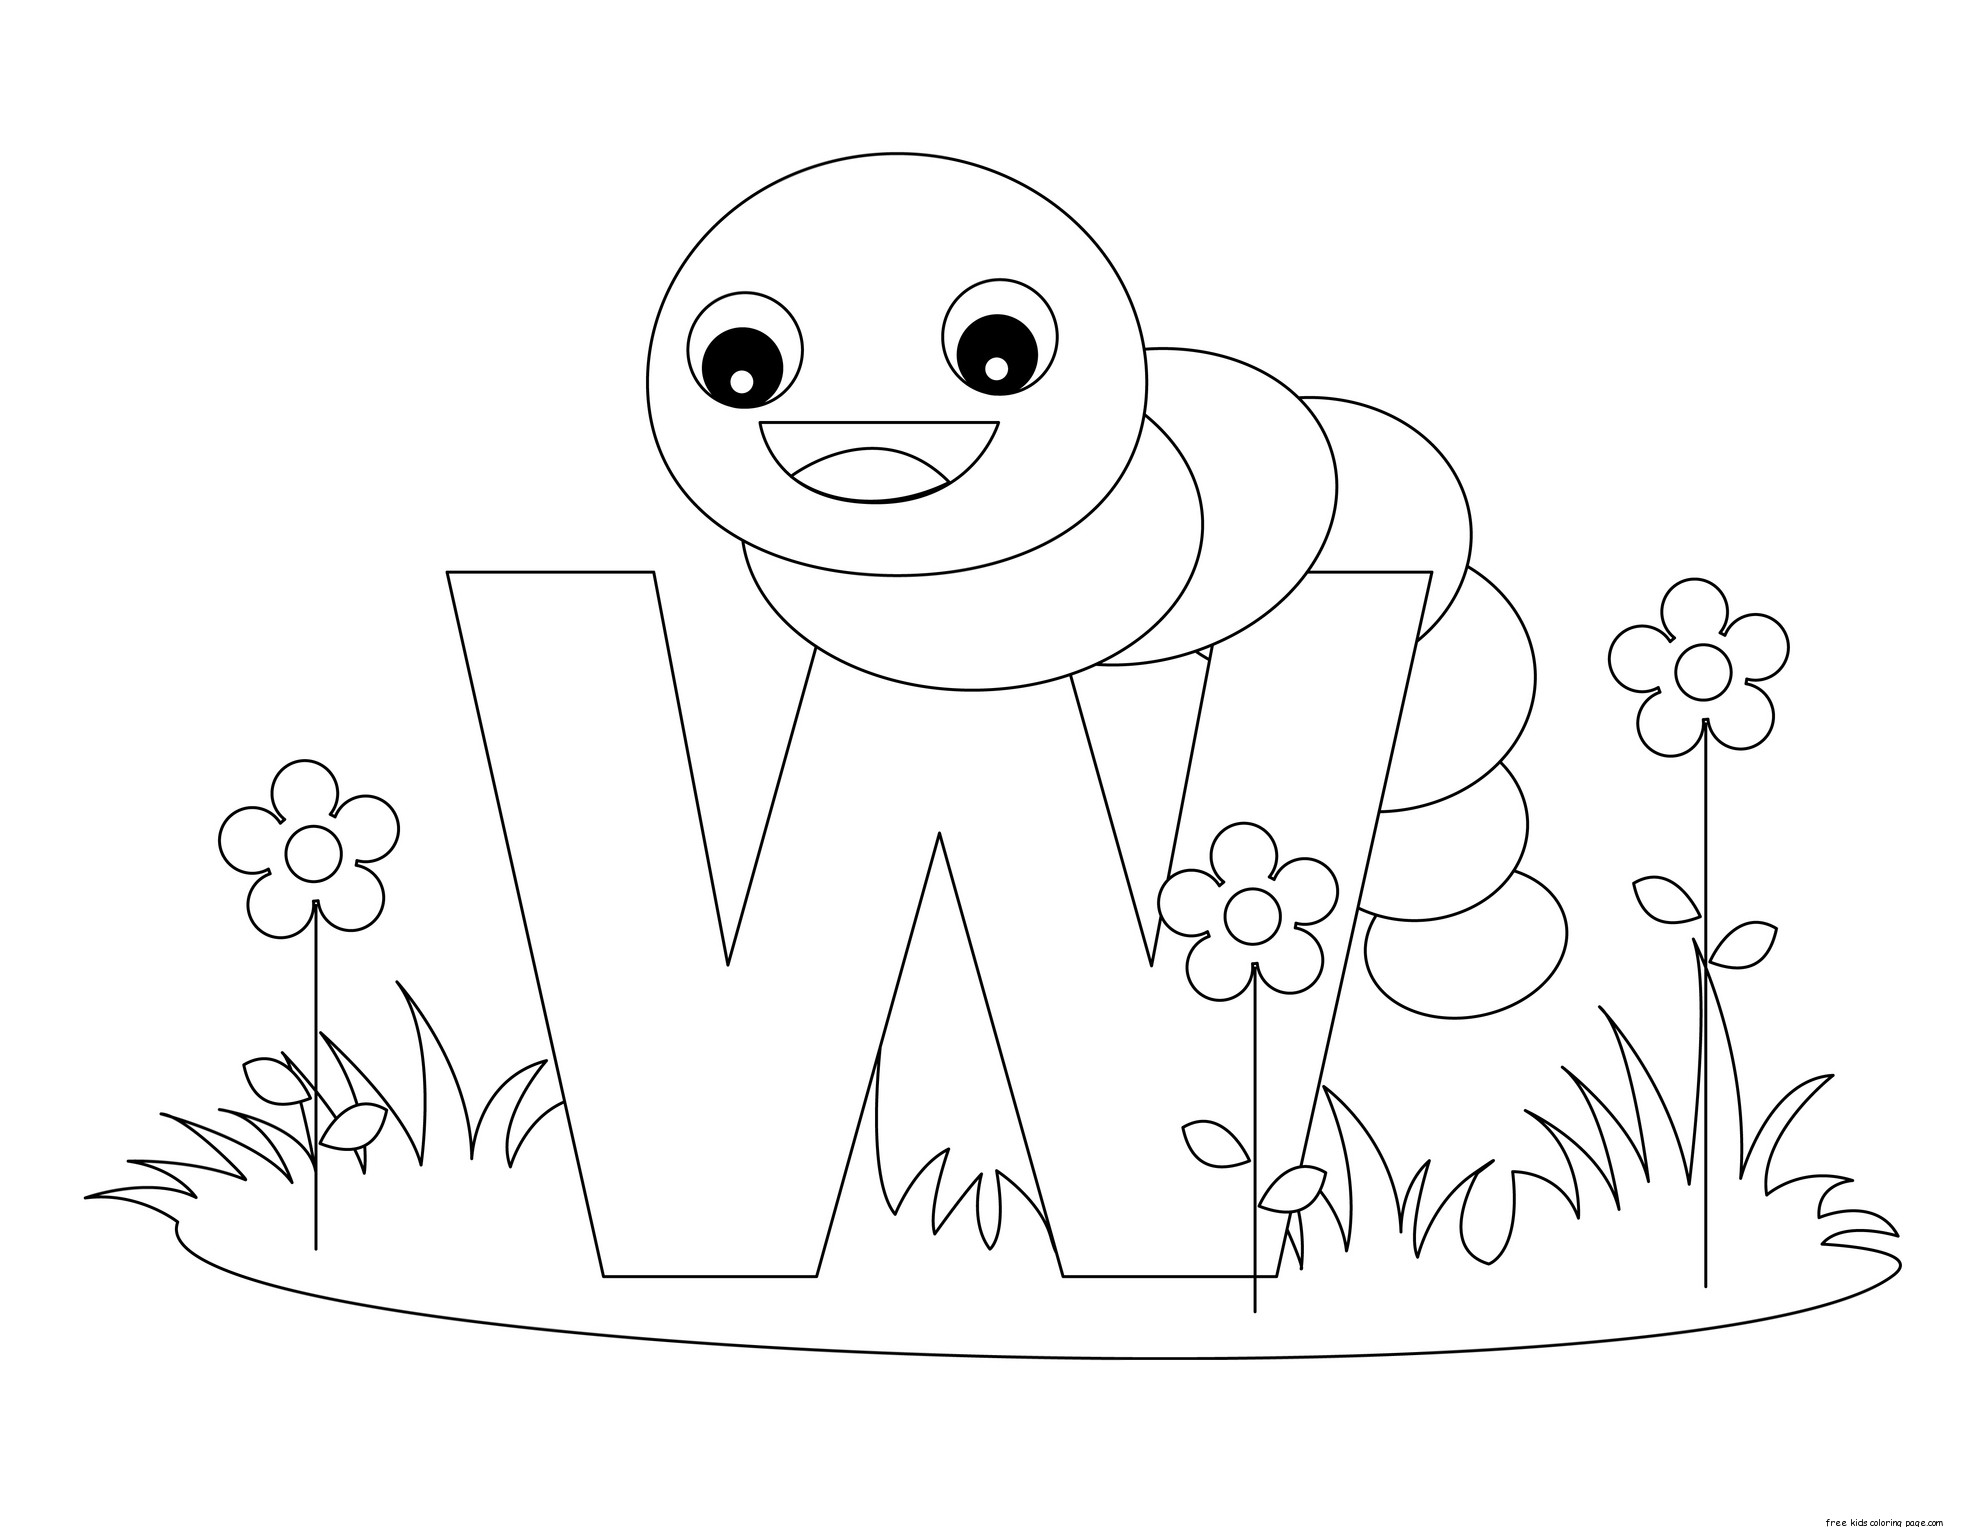 Preschool Letter W Coloring Pages Image